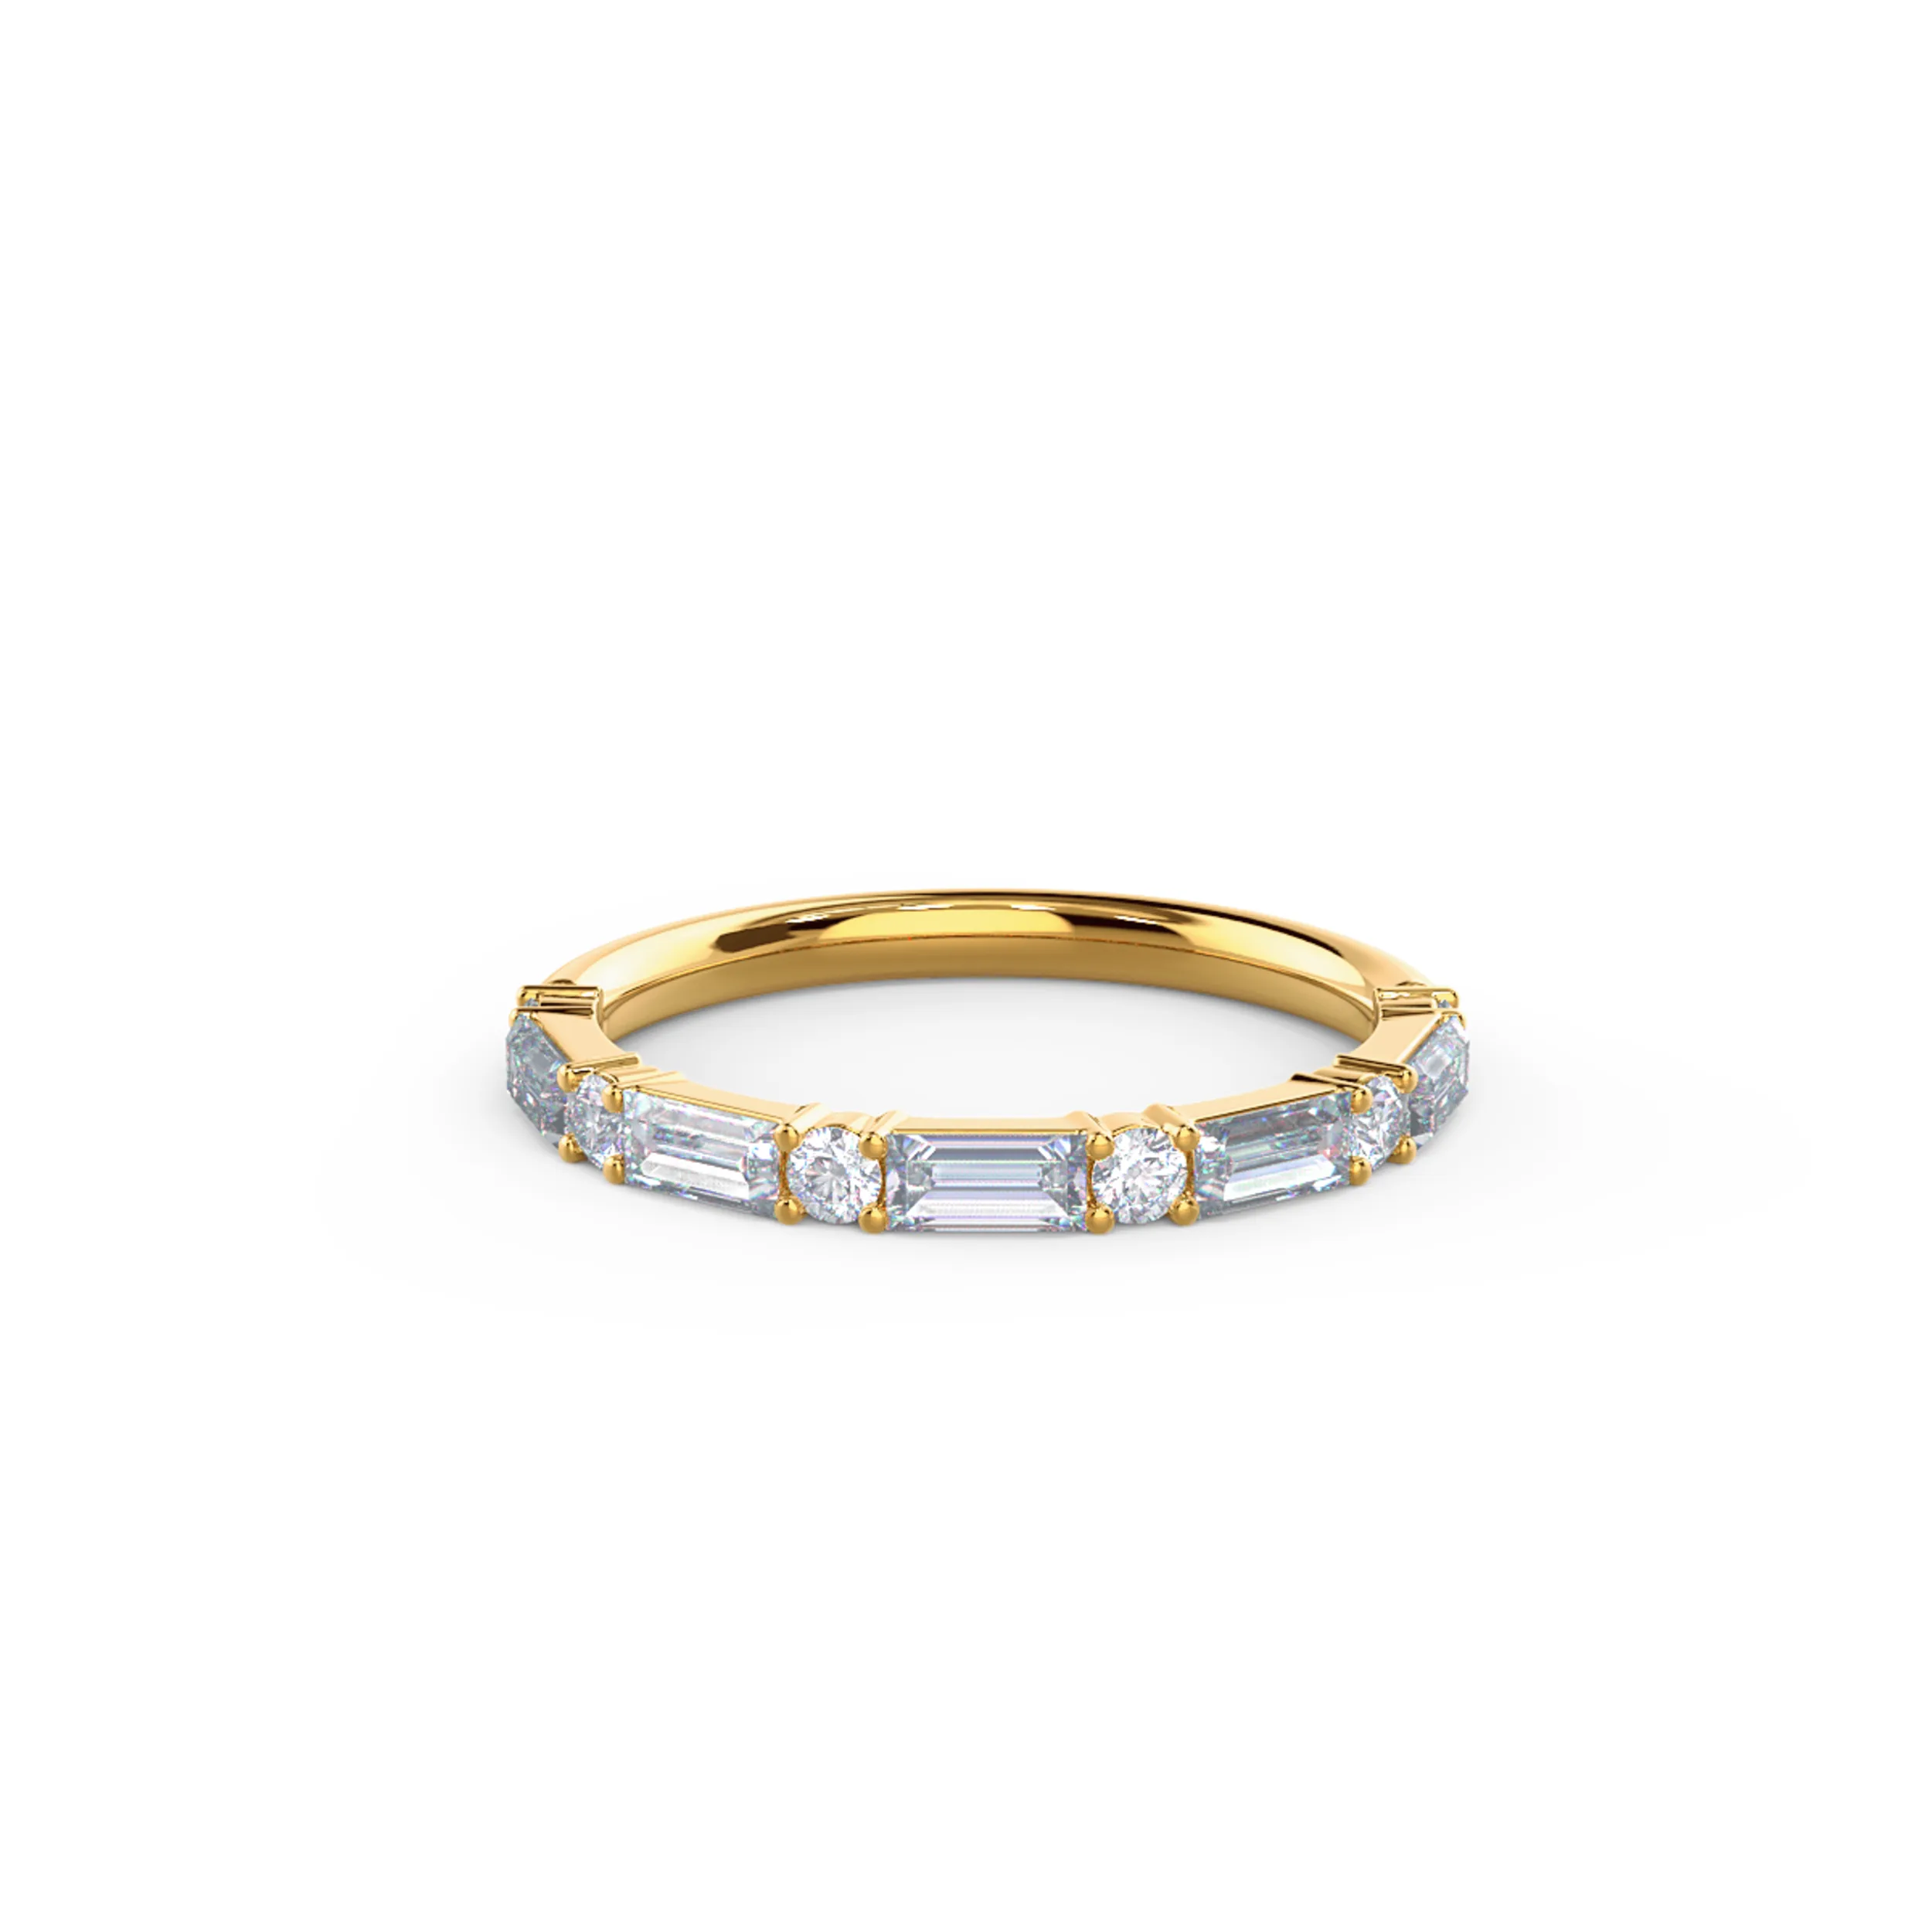 Hand Selected 0.65 ctw Lab Diamonds set in 18k Yellow Gold Baguette and Round Half Band (Main View)